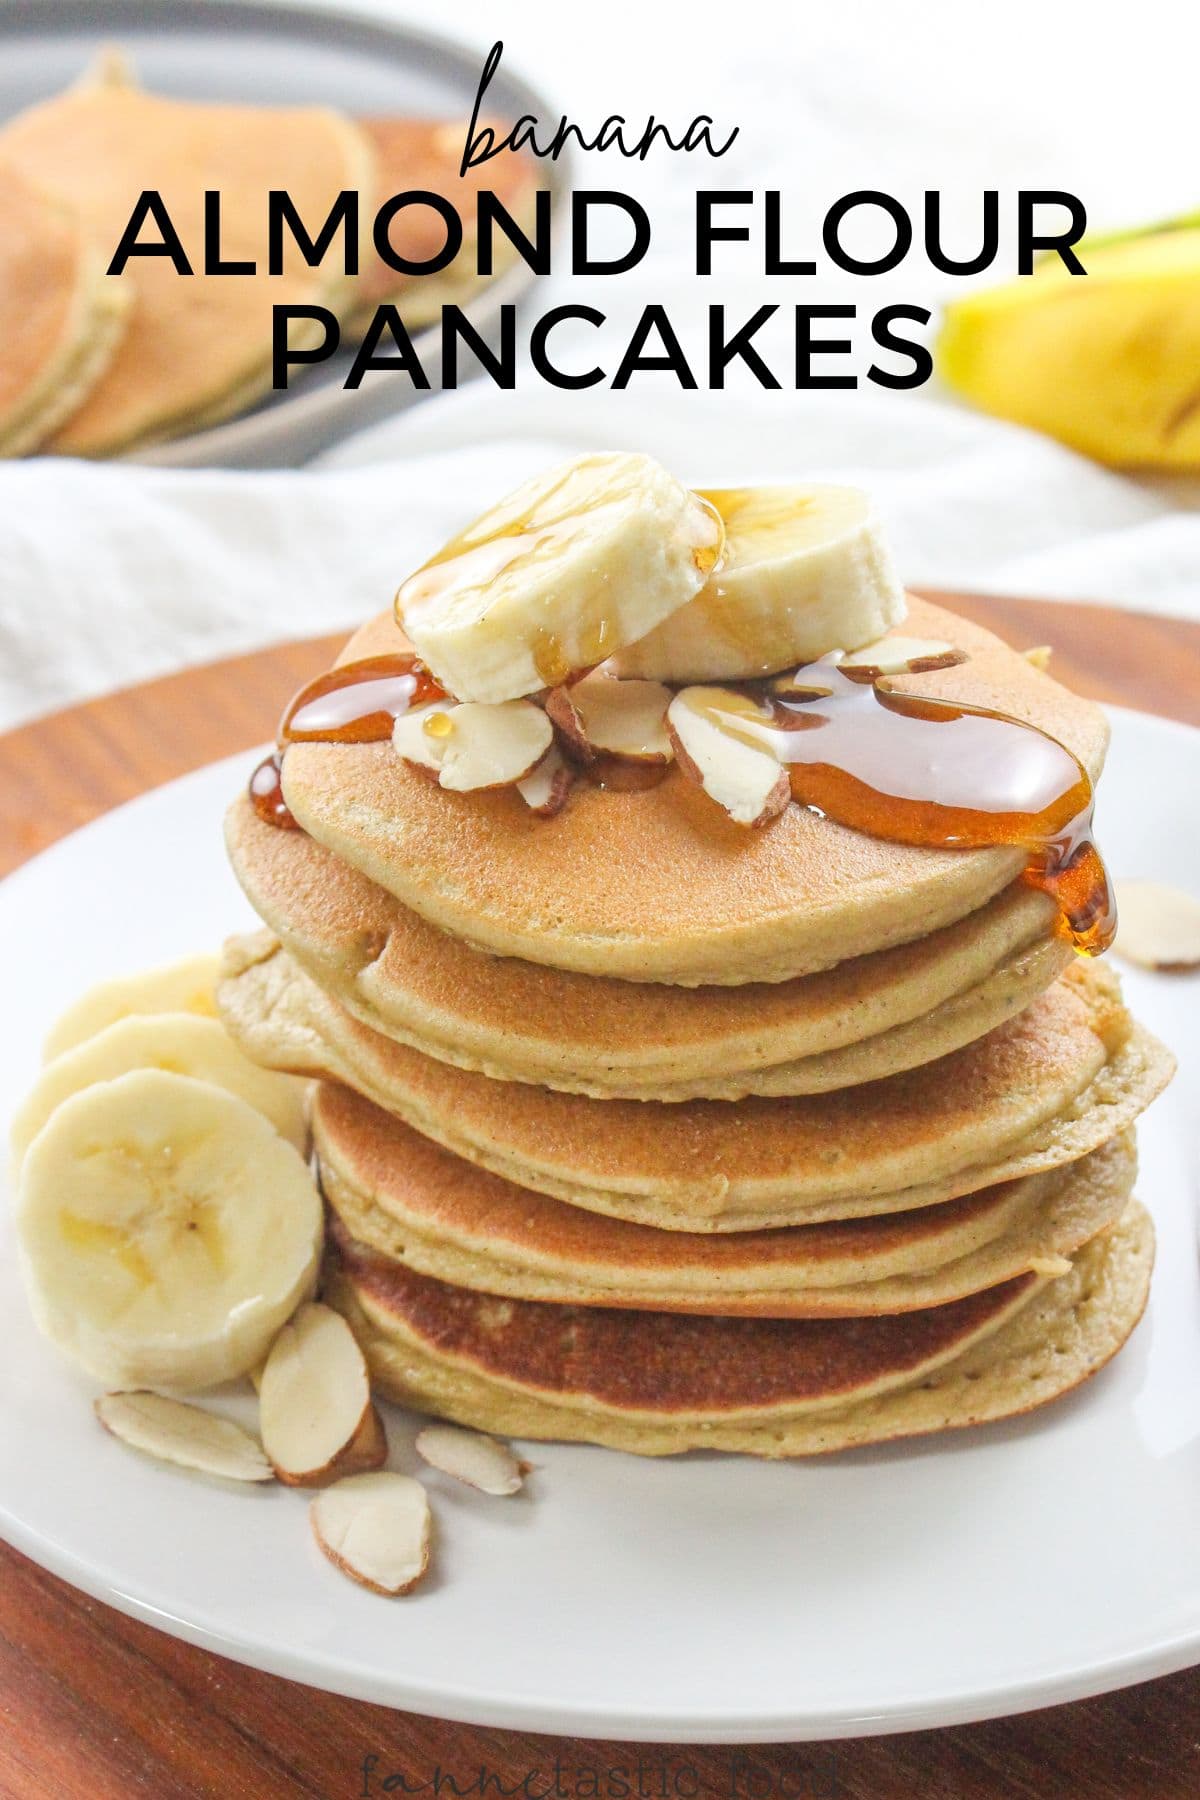 almond flour pancakes with banana and maple syrup